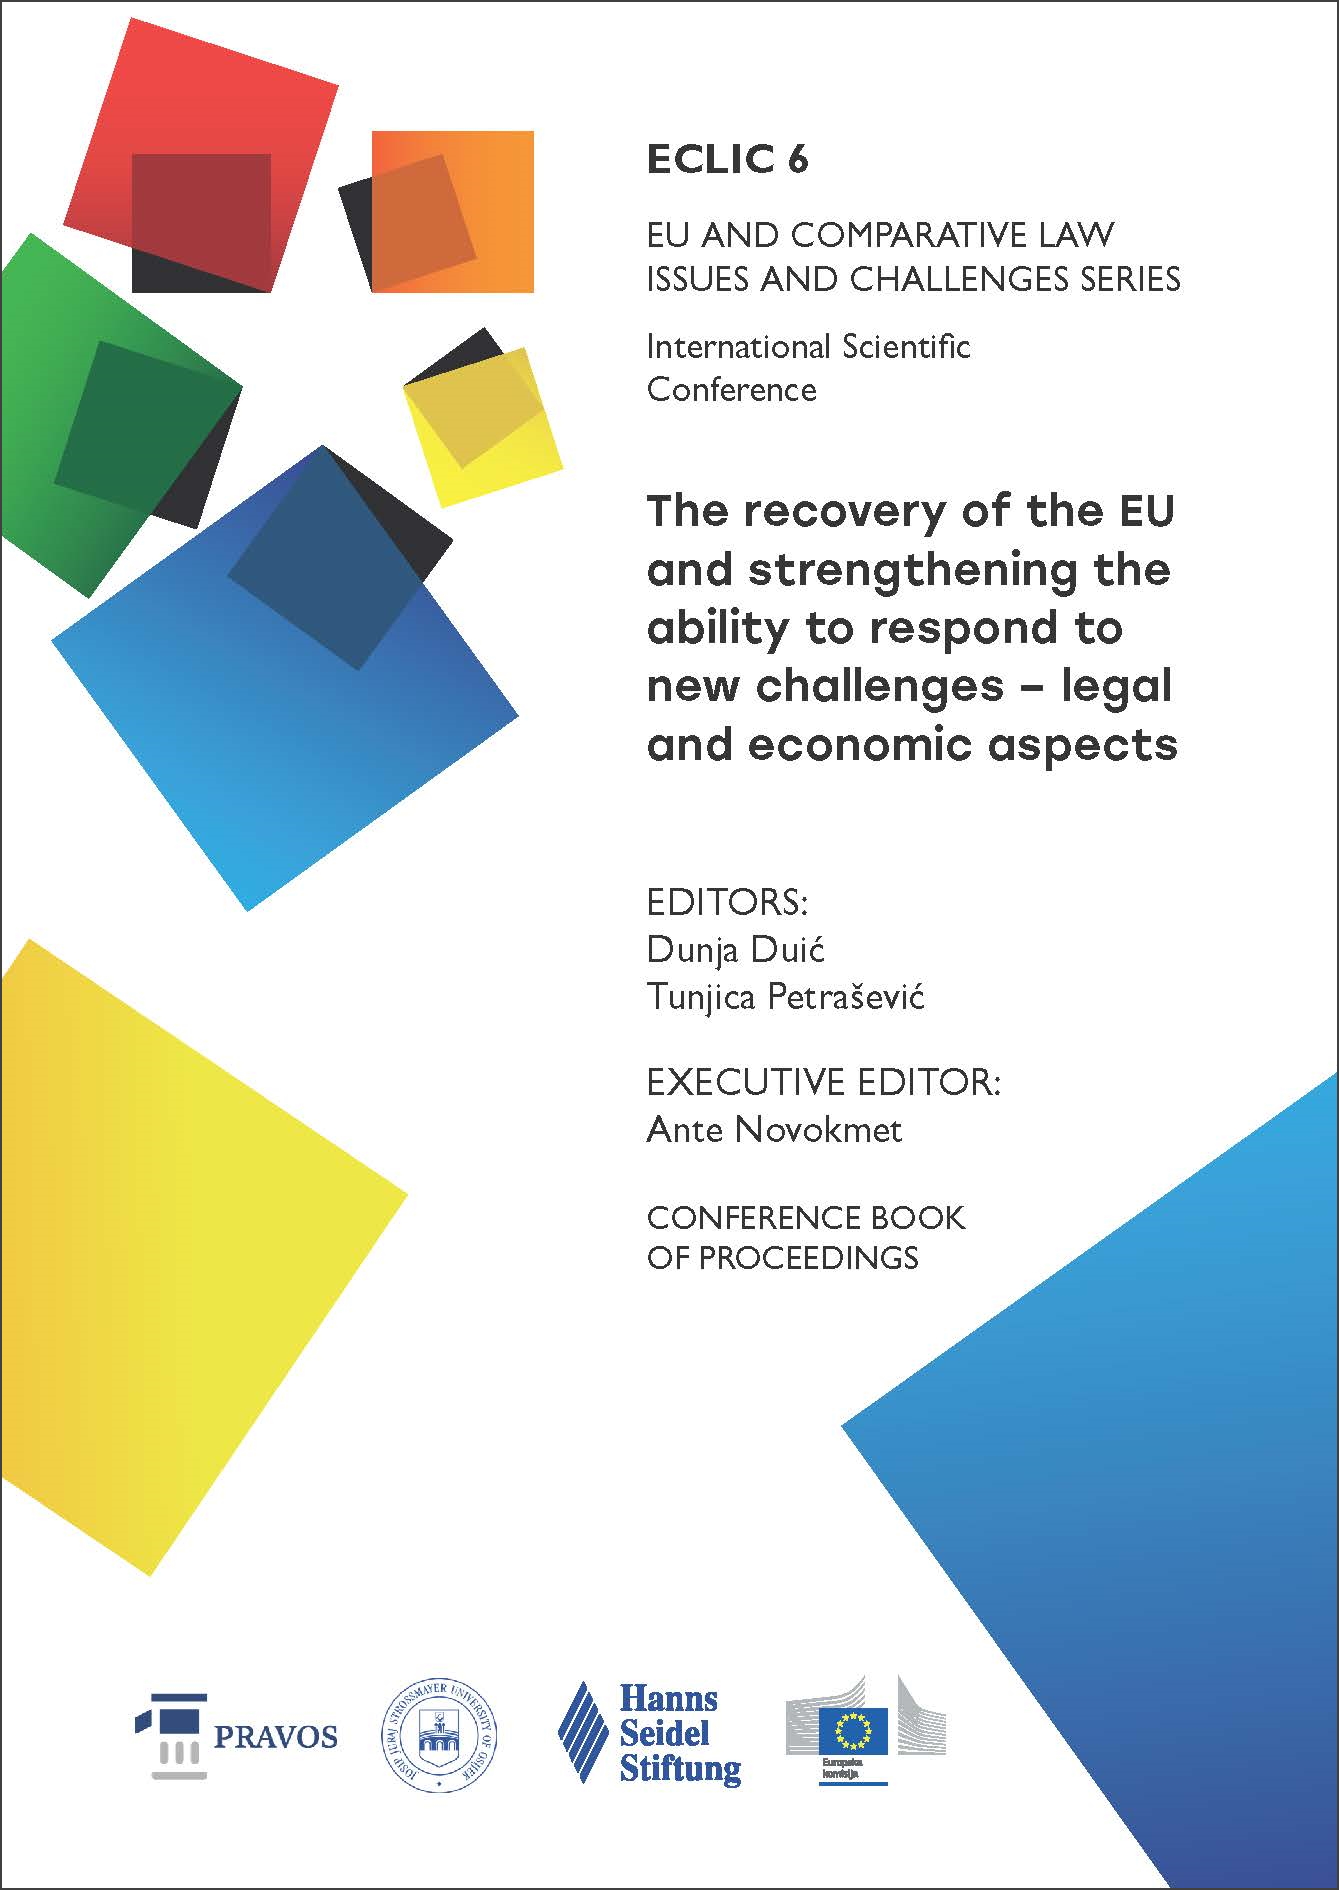 					View Vol. 6 (2022): THE RECOVERY OF THE EU AND STRENGTHENING THE ABILITY TO RESPOND TO NEW CHALLENGES – LEGAL AND ECONOMIC ASPECTS
				